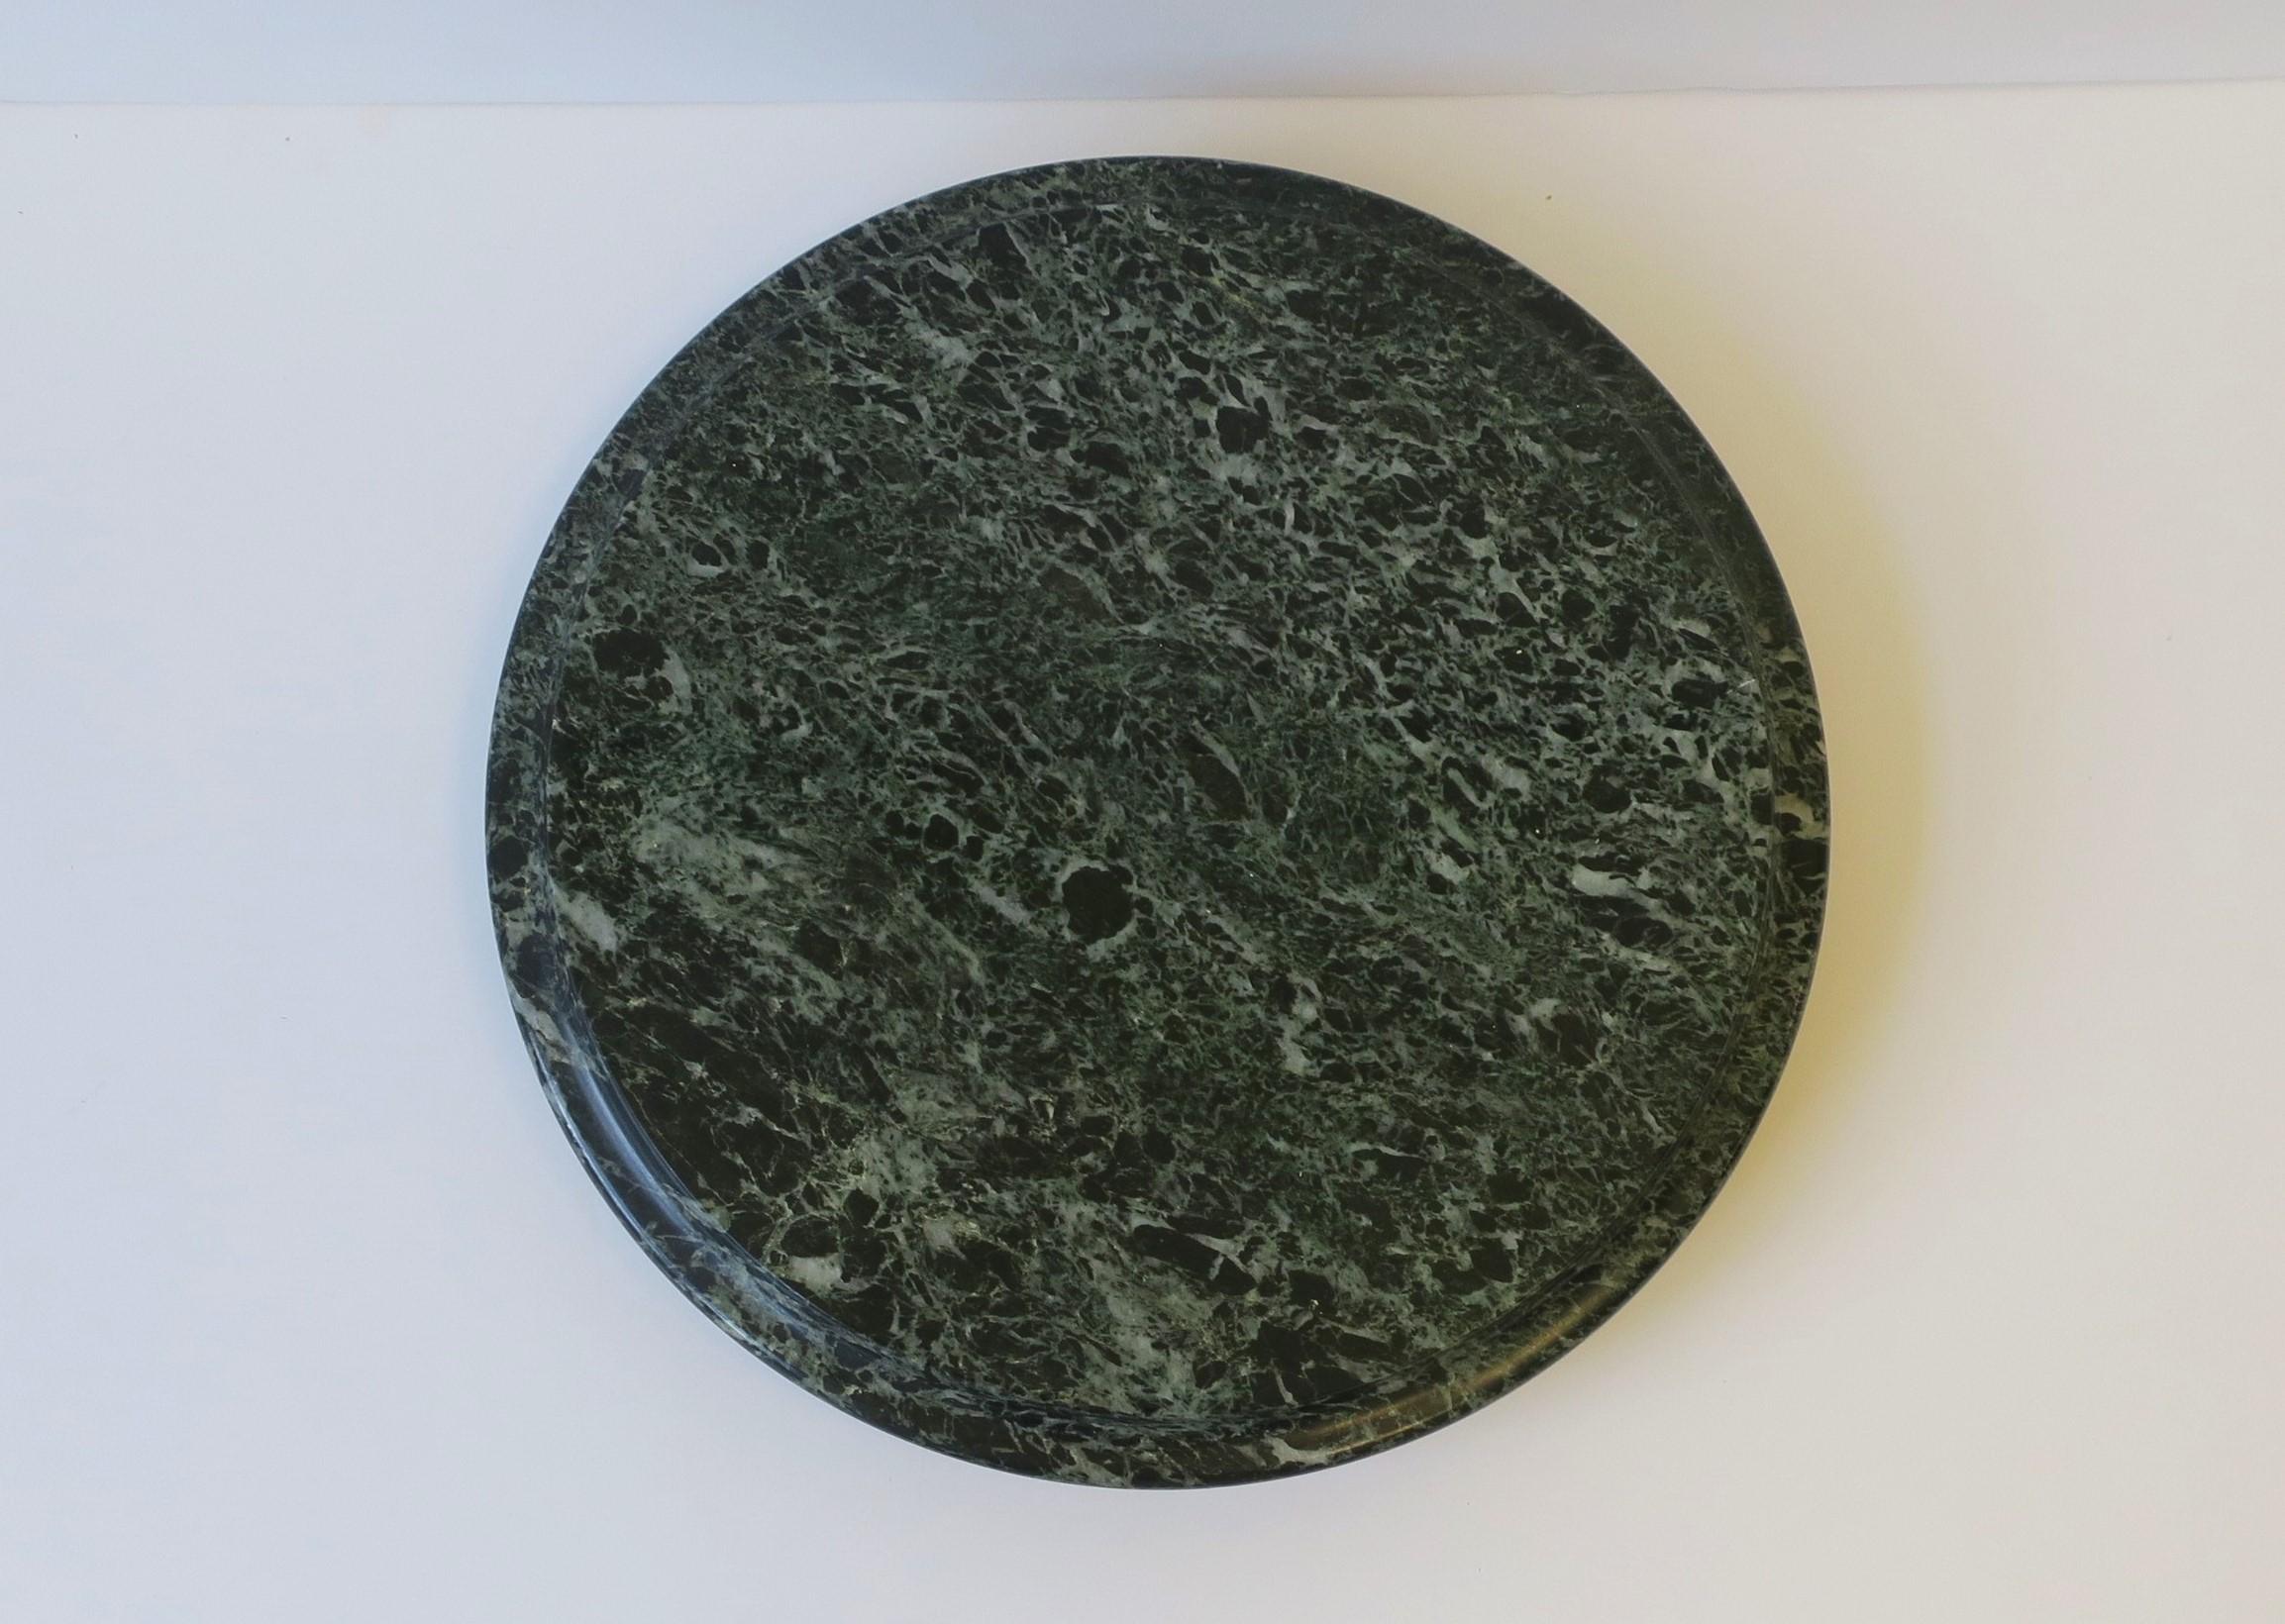 A substantial dark green marble Lazy Susan, circa late-20th century. Marble is dark green with white veining. A great piece for a kitchen, bar, entertaining area, etc. Use it to hold salt/pepper, condiments, or use to hold small appetizers,